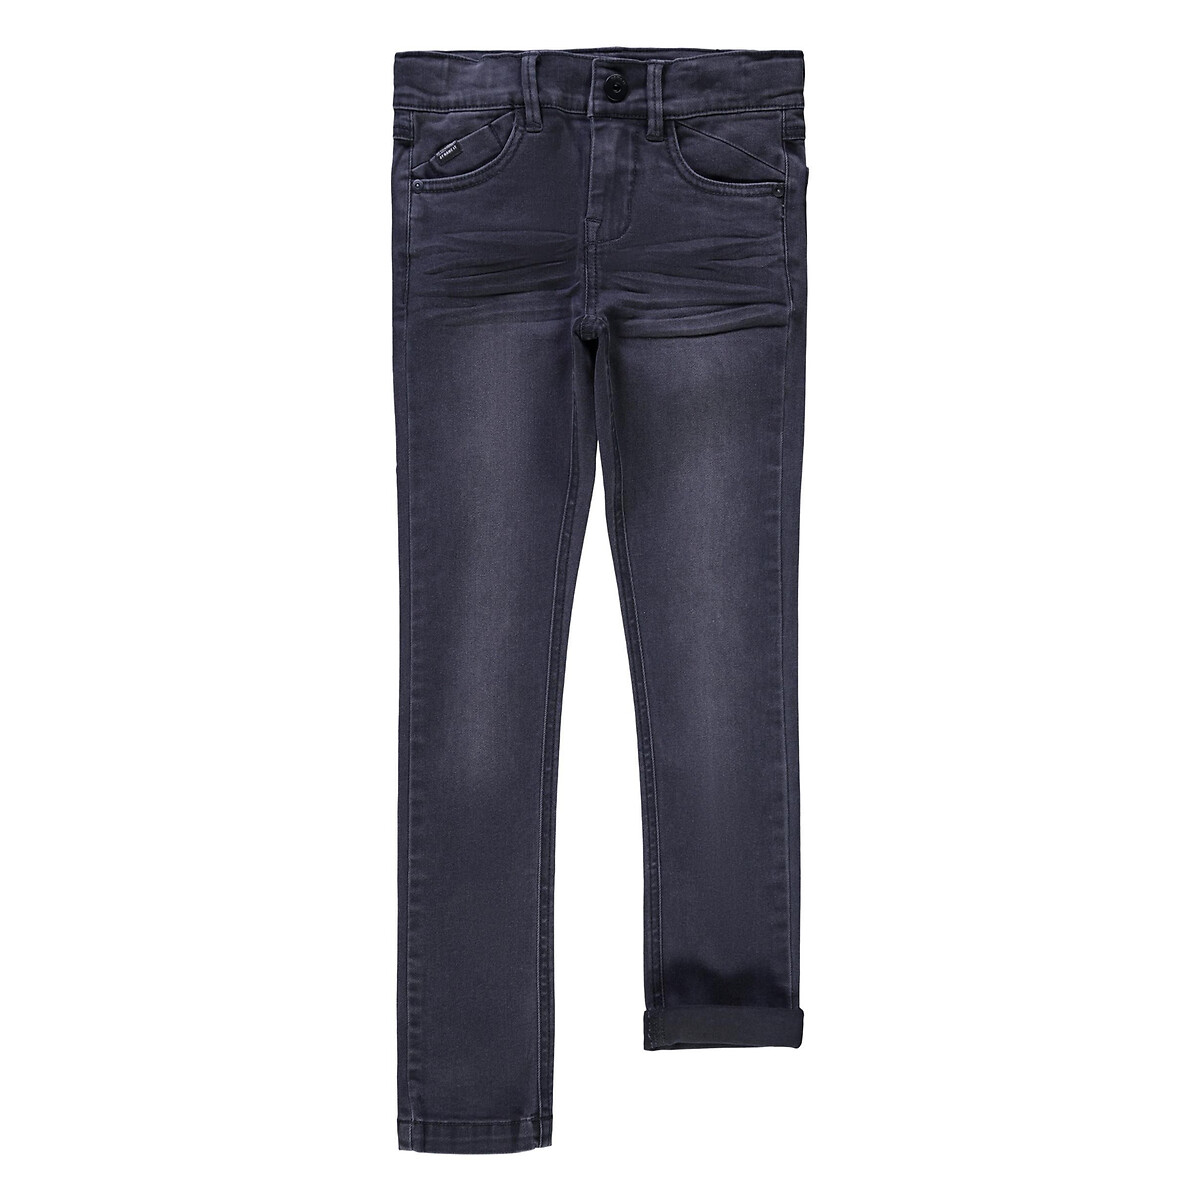 Image of Mid Rise Skinny Jeans in Organic Cotton Mix, 8-14 Years